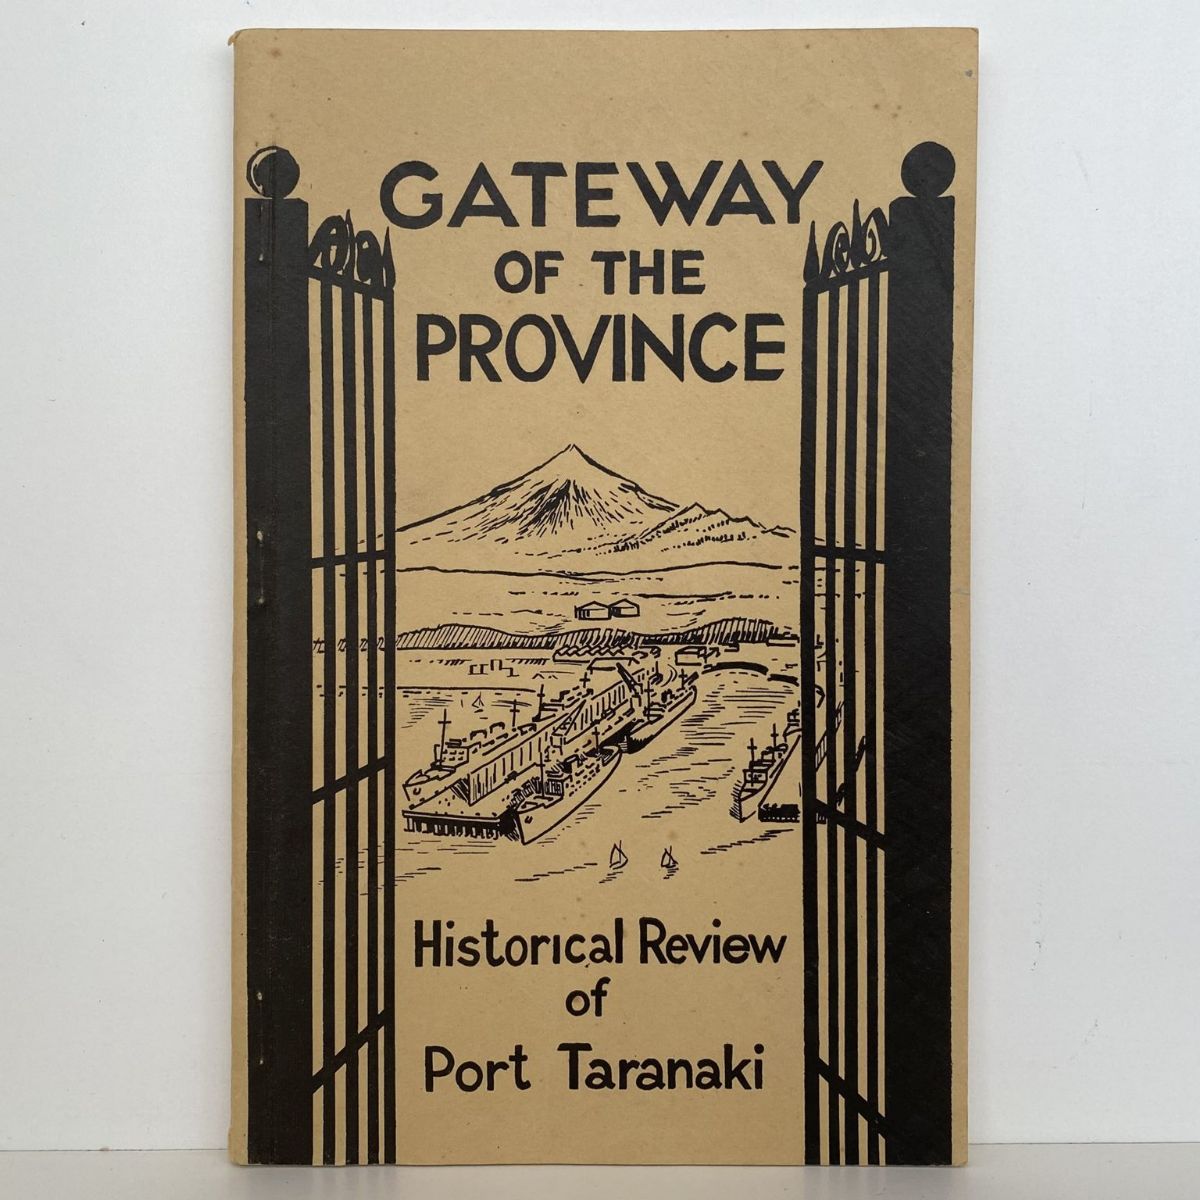 GATEWAY OF THE PROVINCE: Historical Review of Port Taranaki